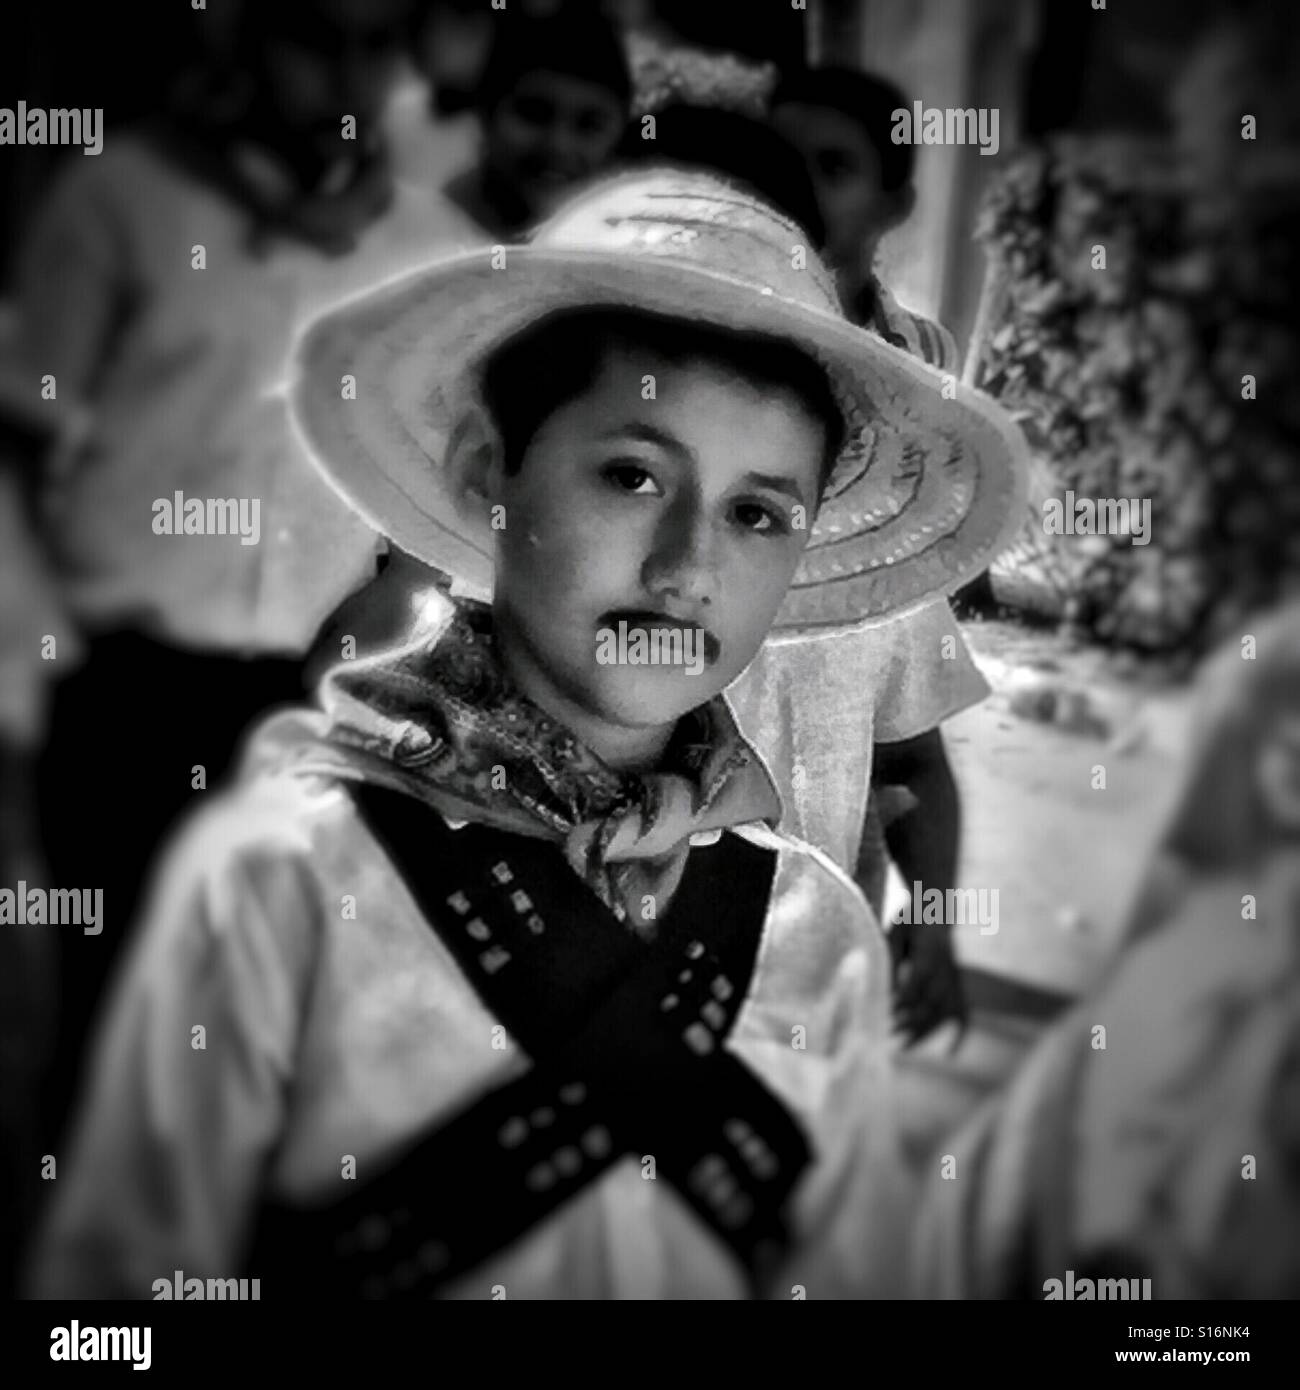 A boy with a painted on mustache participates in a parade celebrating Mexico's Revolution Day. Stock Photo